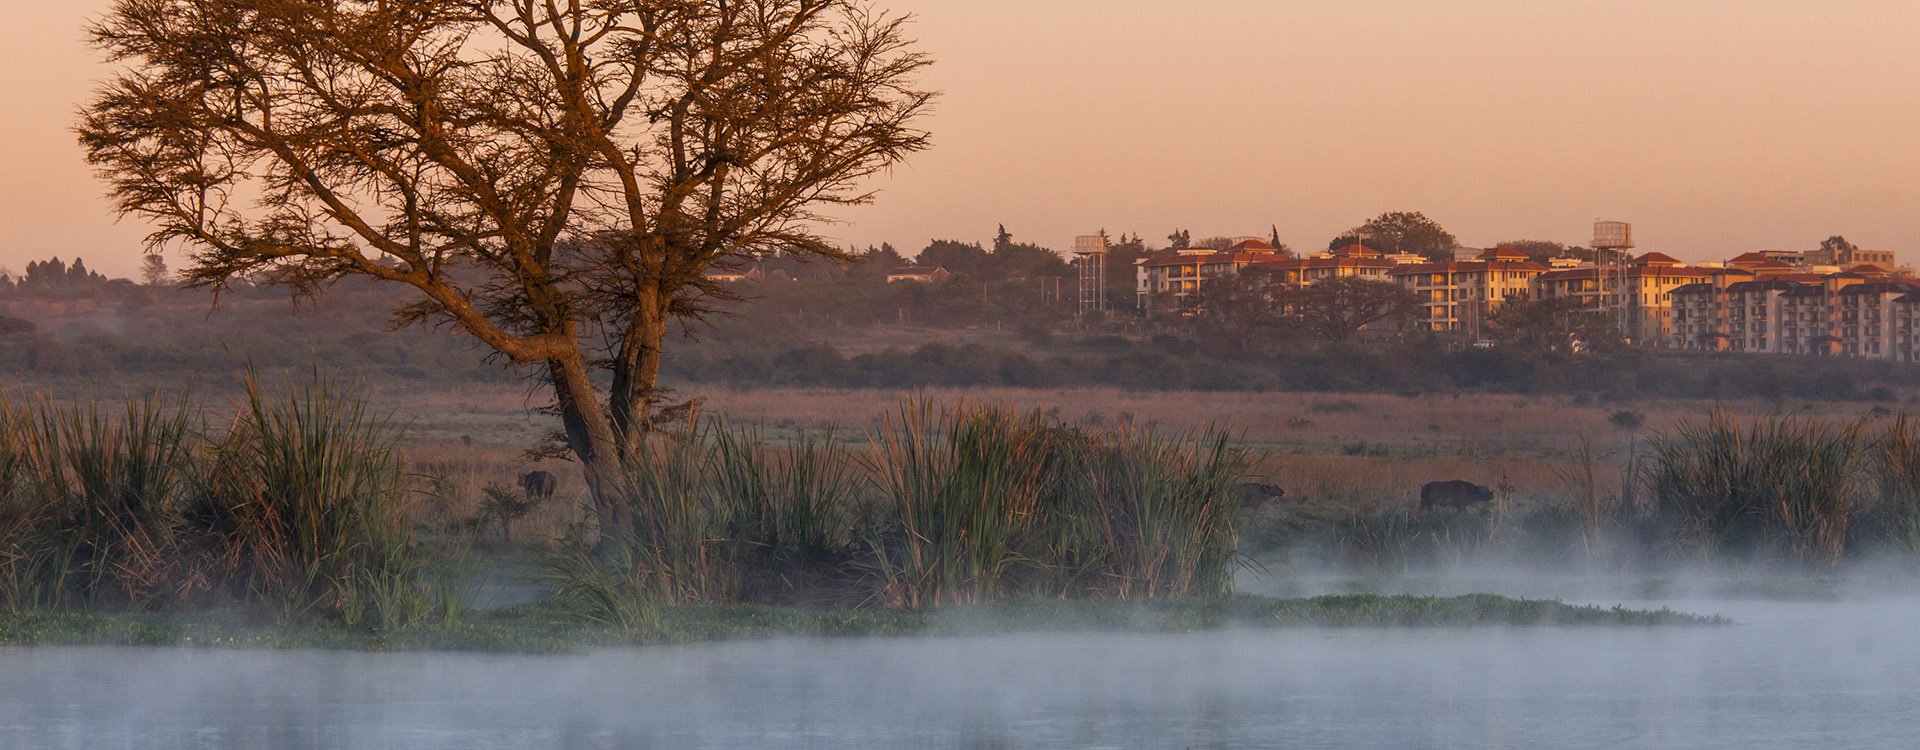 Dawn in Nairobi National Park with buildings in background